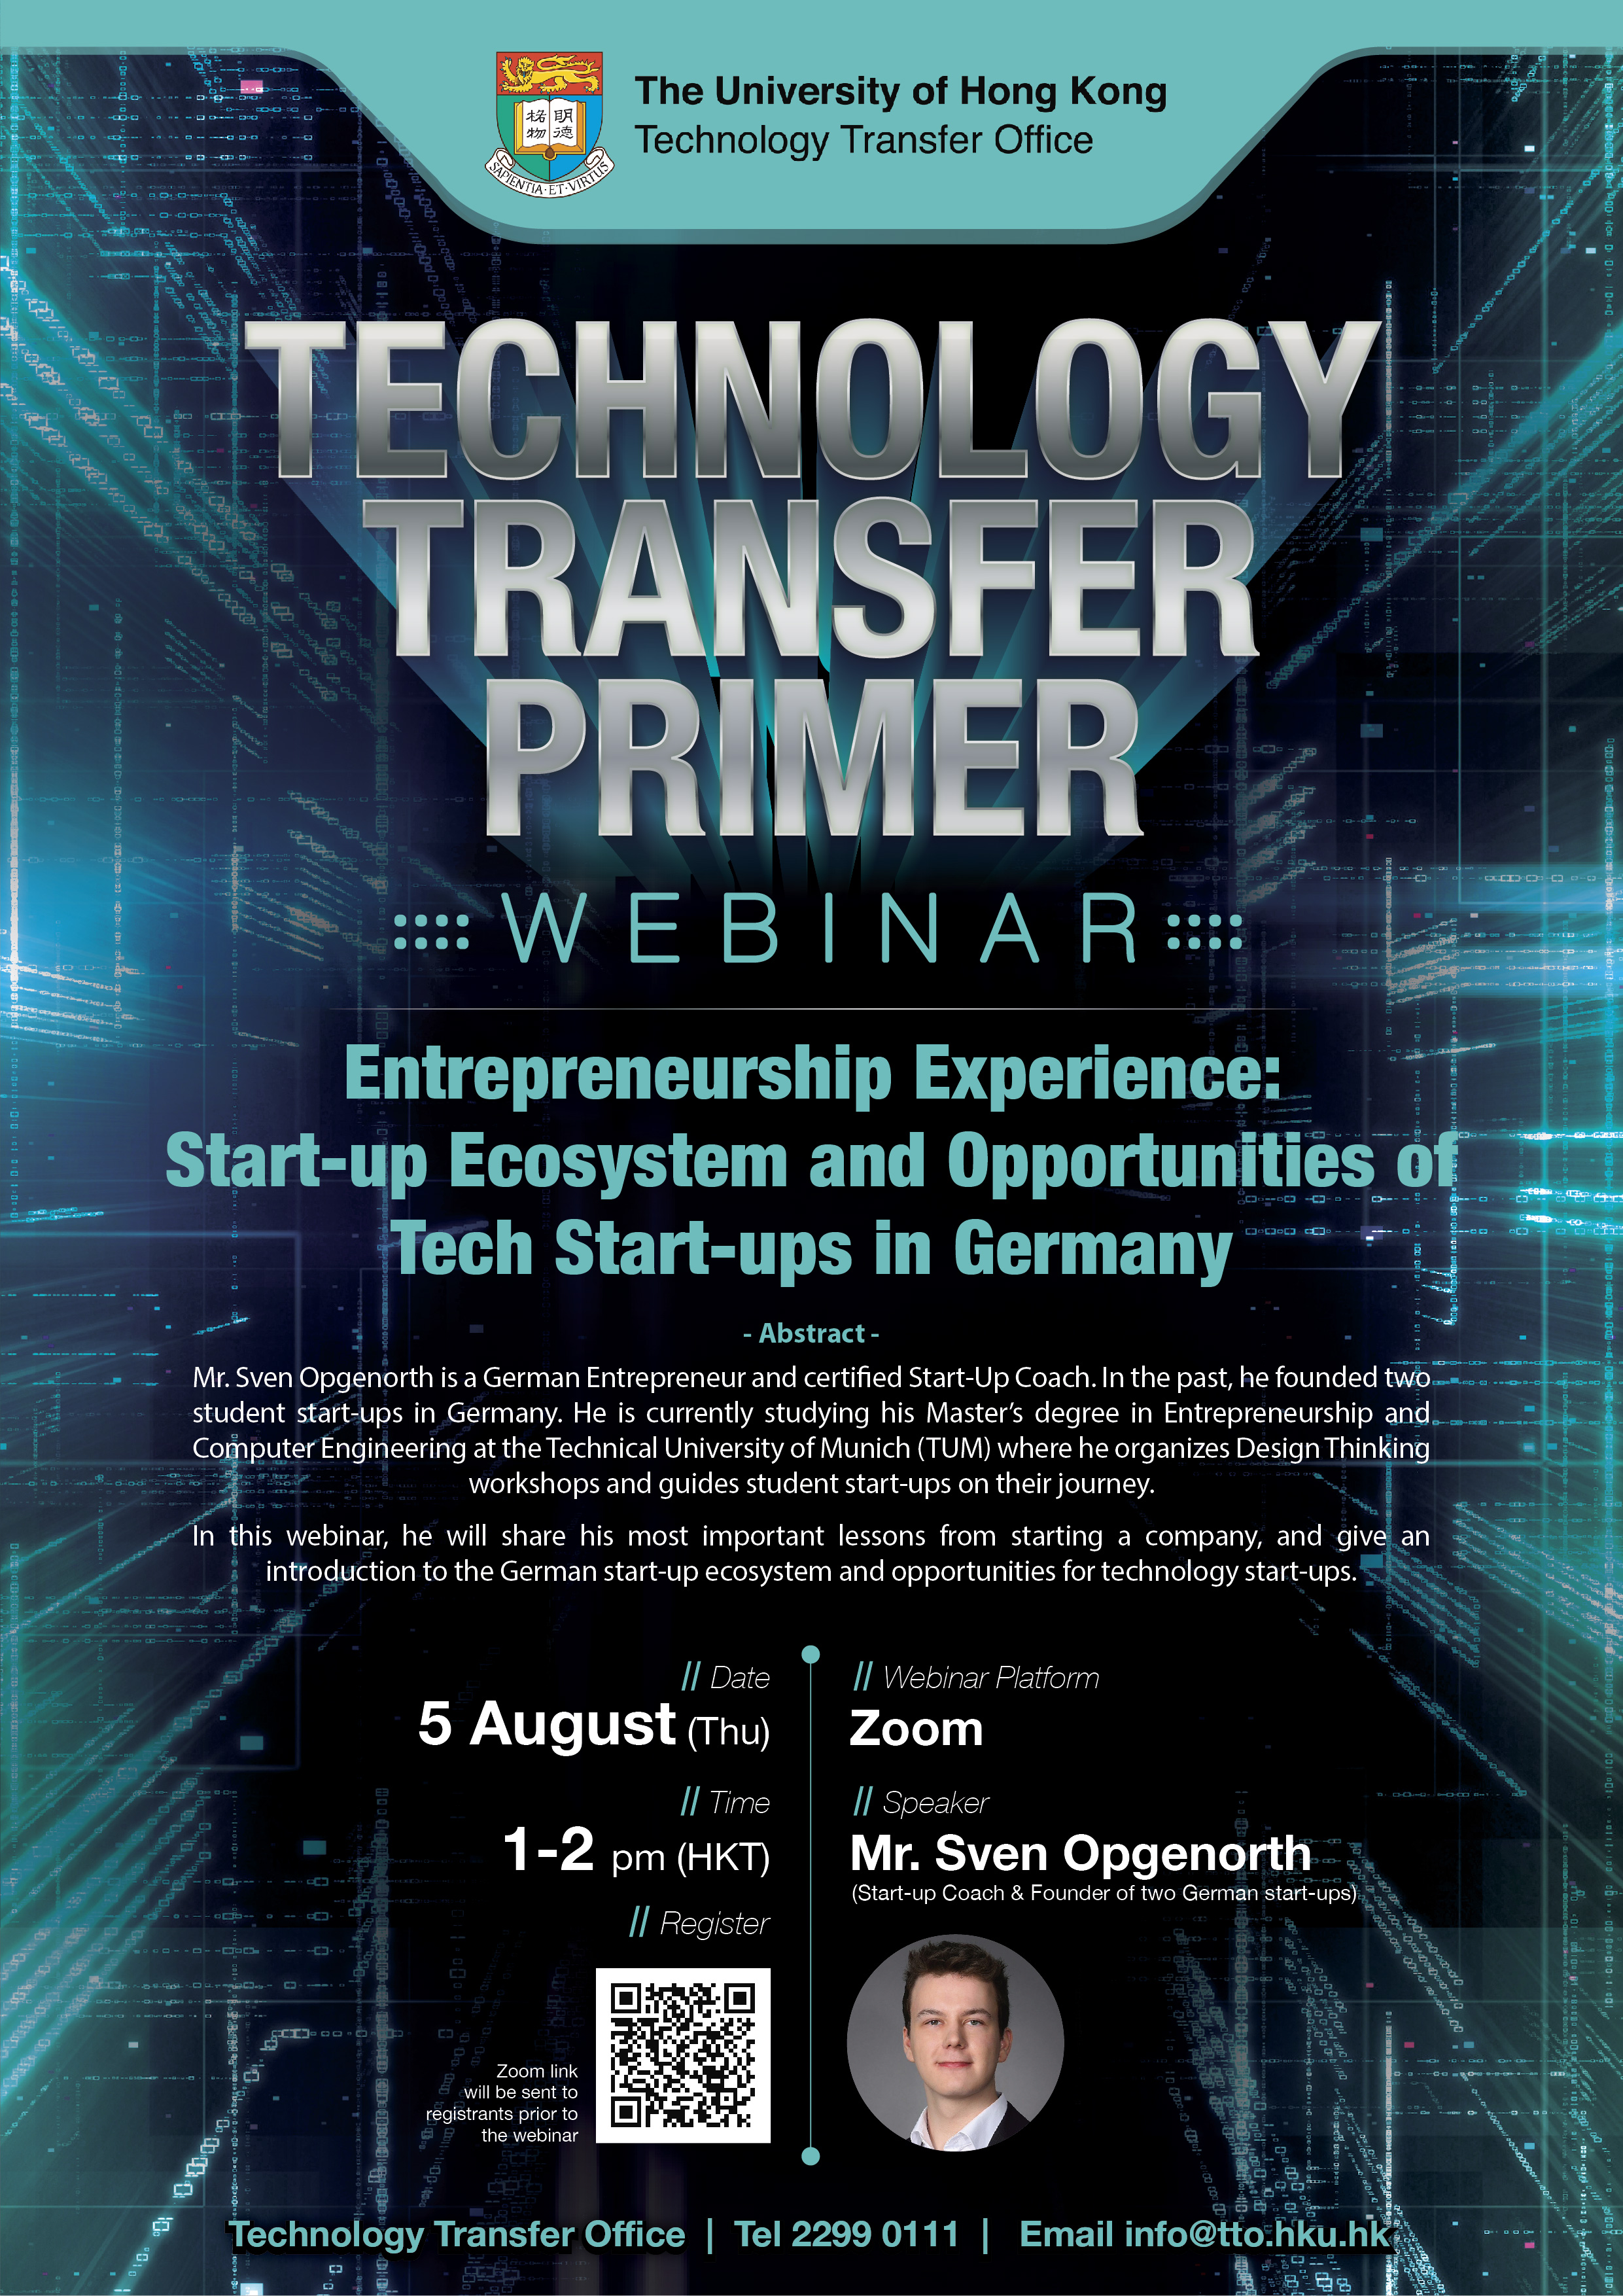 Entrepreneurship Experience: Start-up Ecosystem and Opportunities of Tech Start-ups in Germany